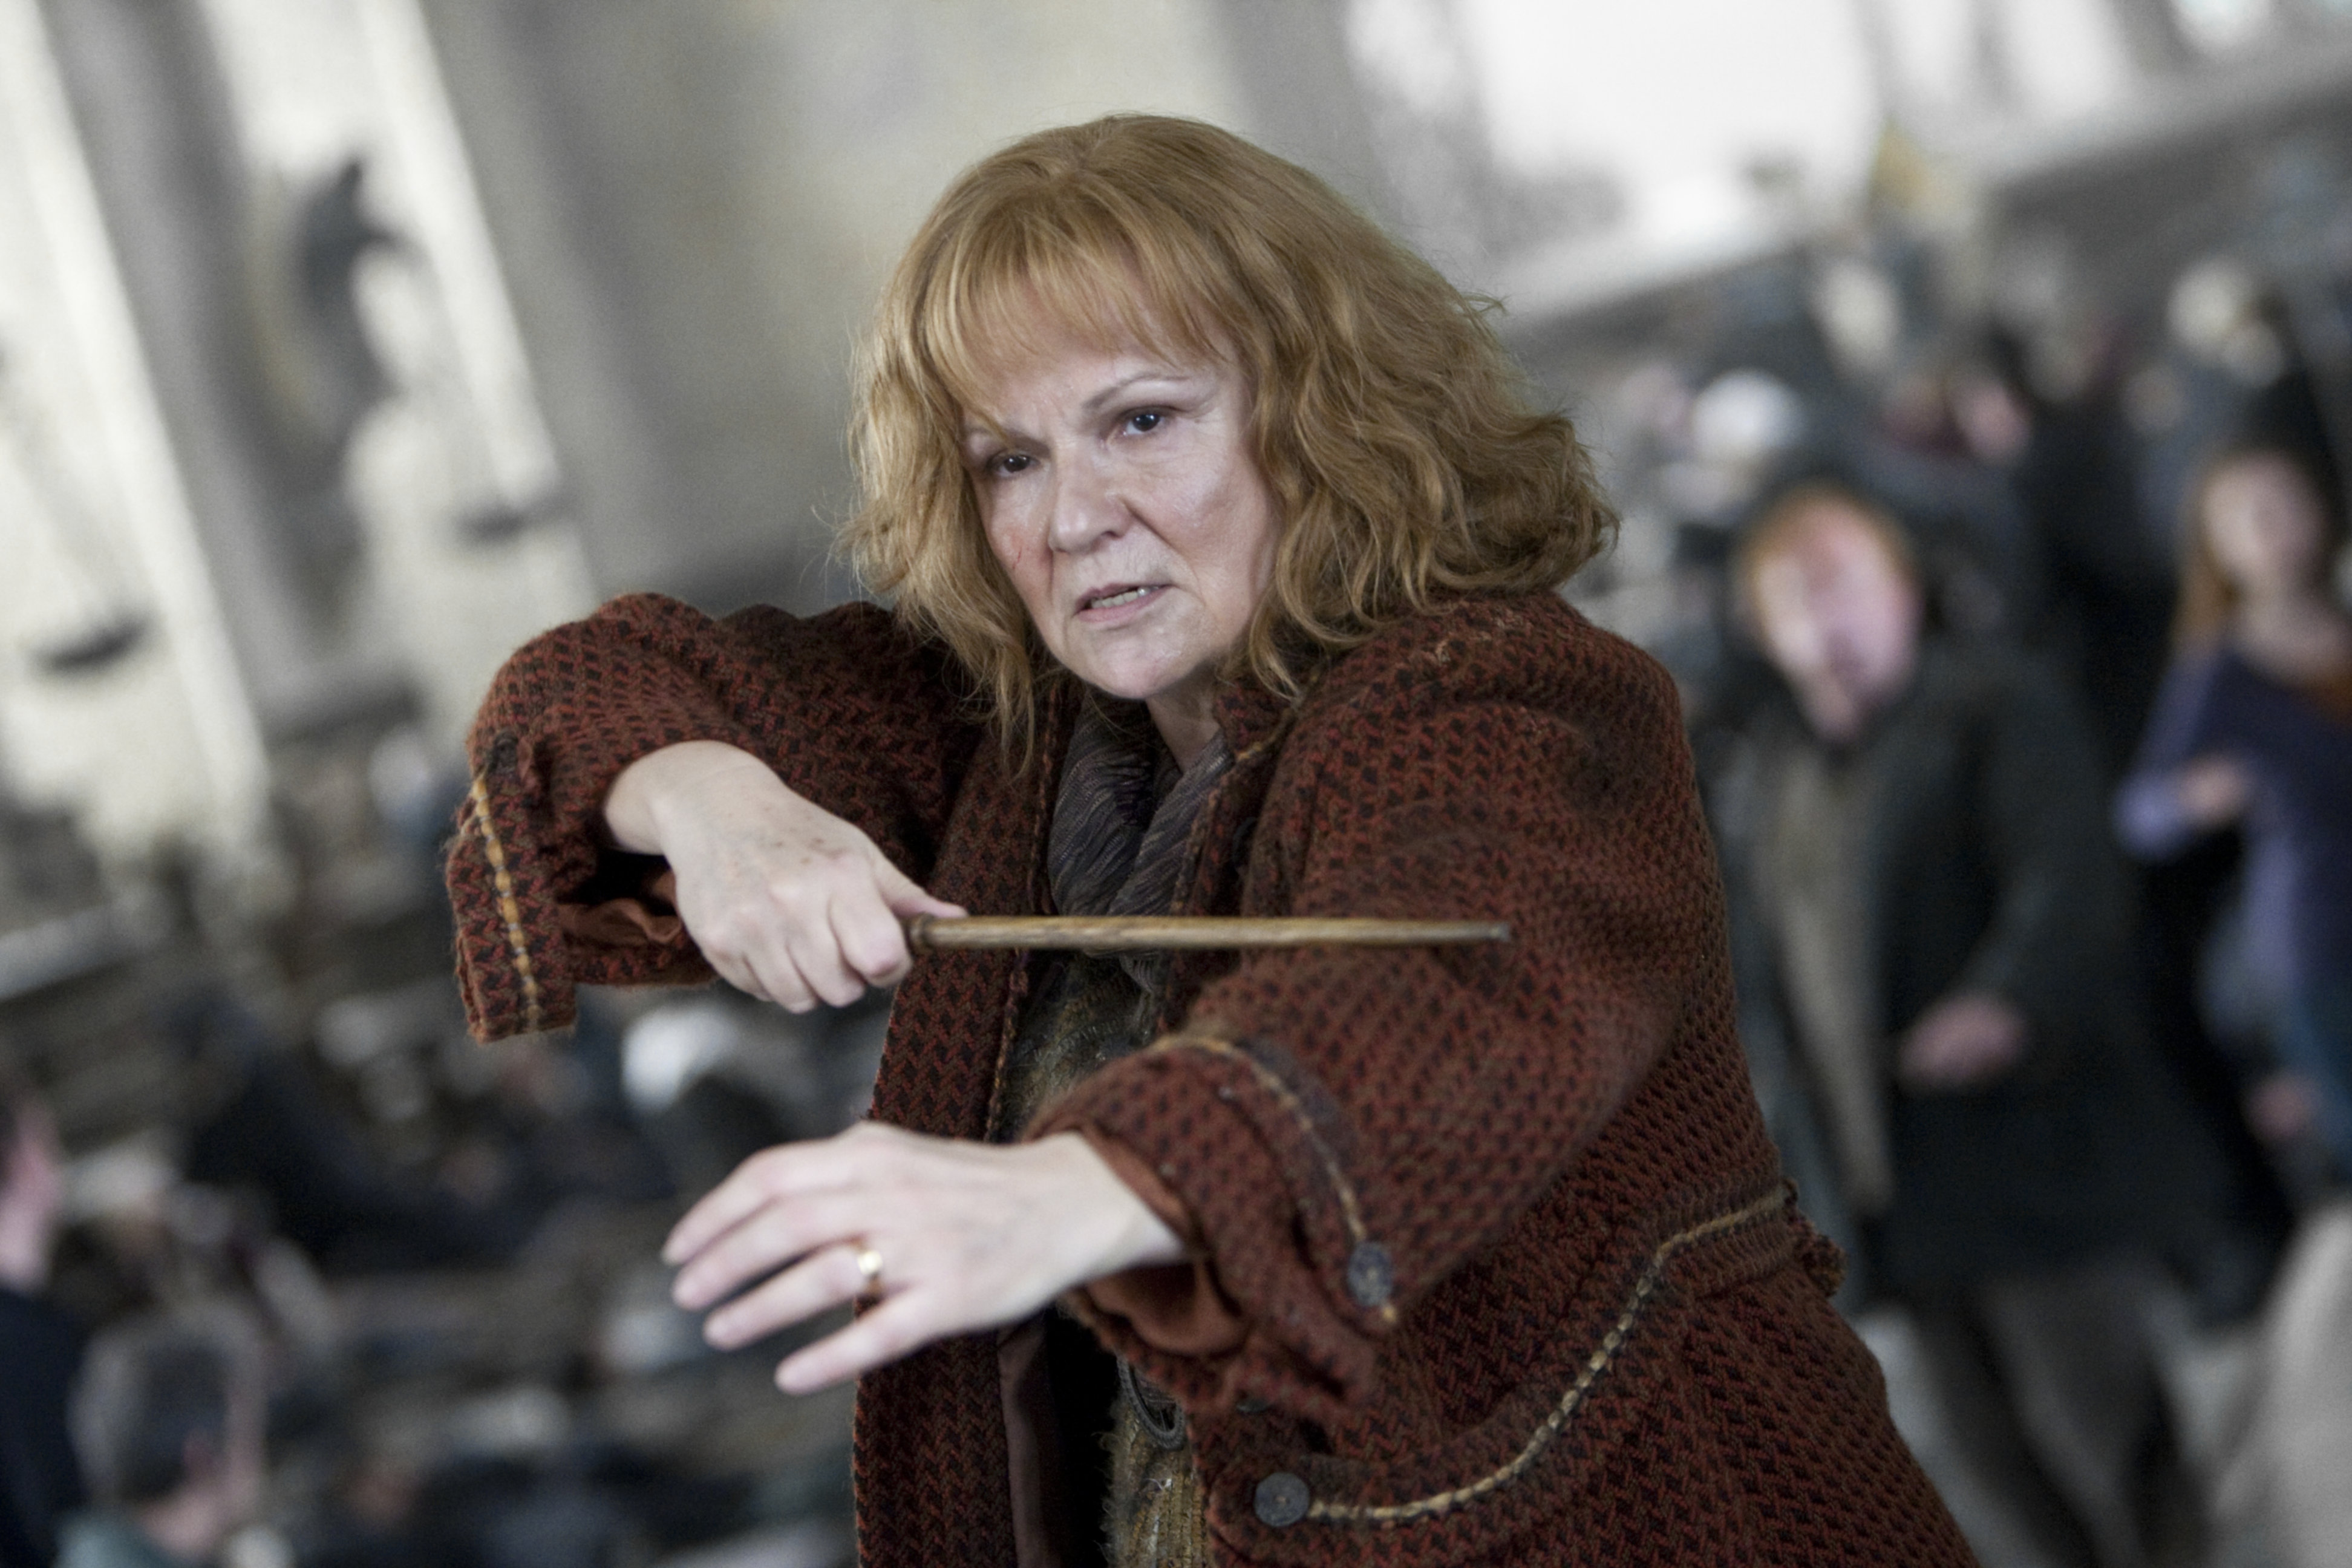 Who portrayed Molly Weasley in the Harry Potter movies? 2